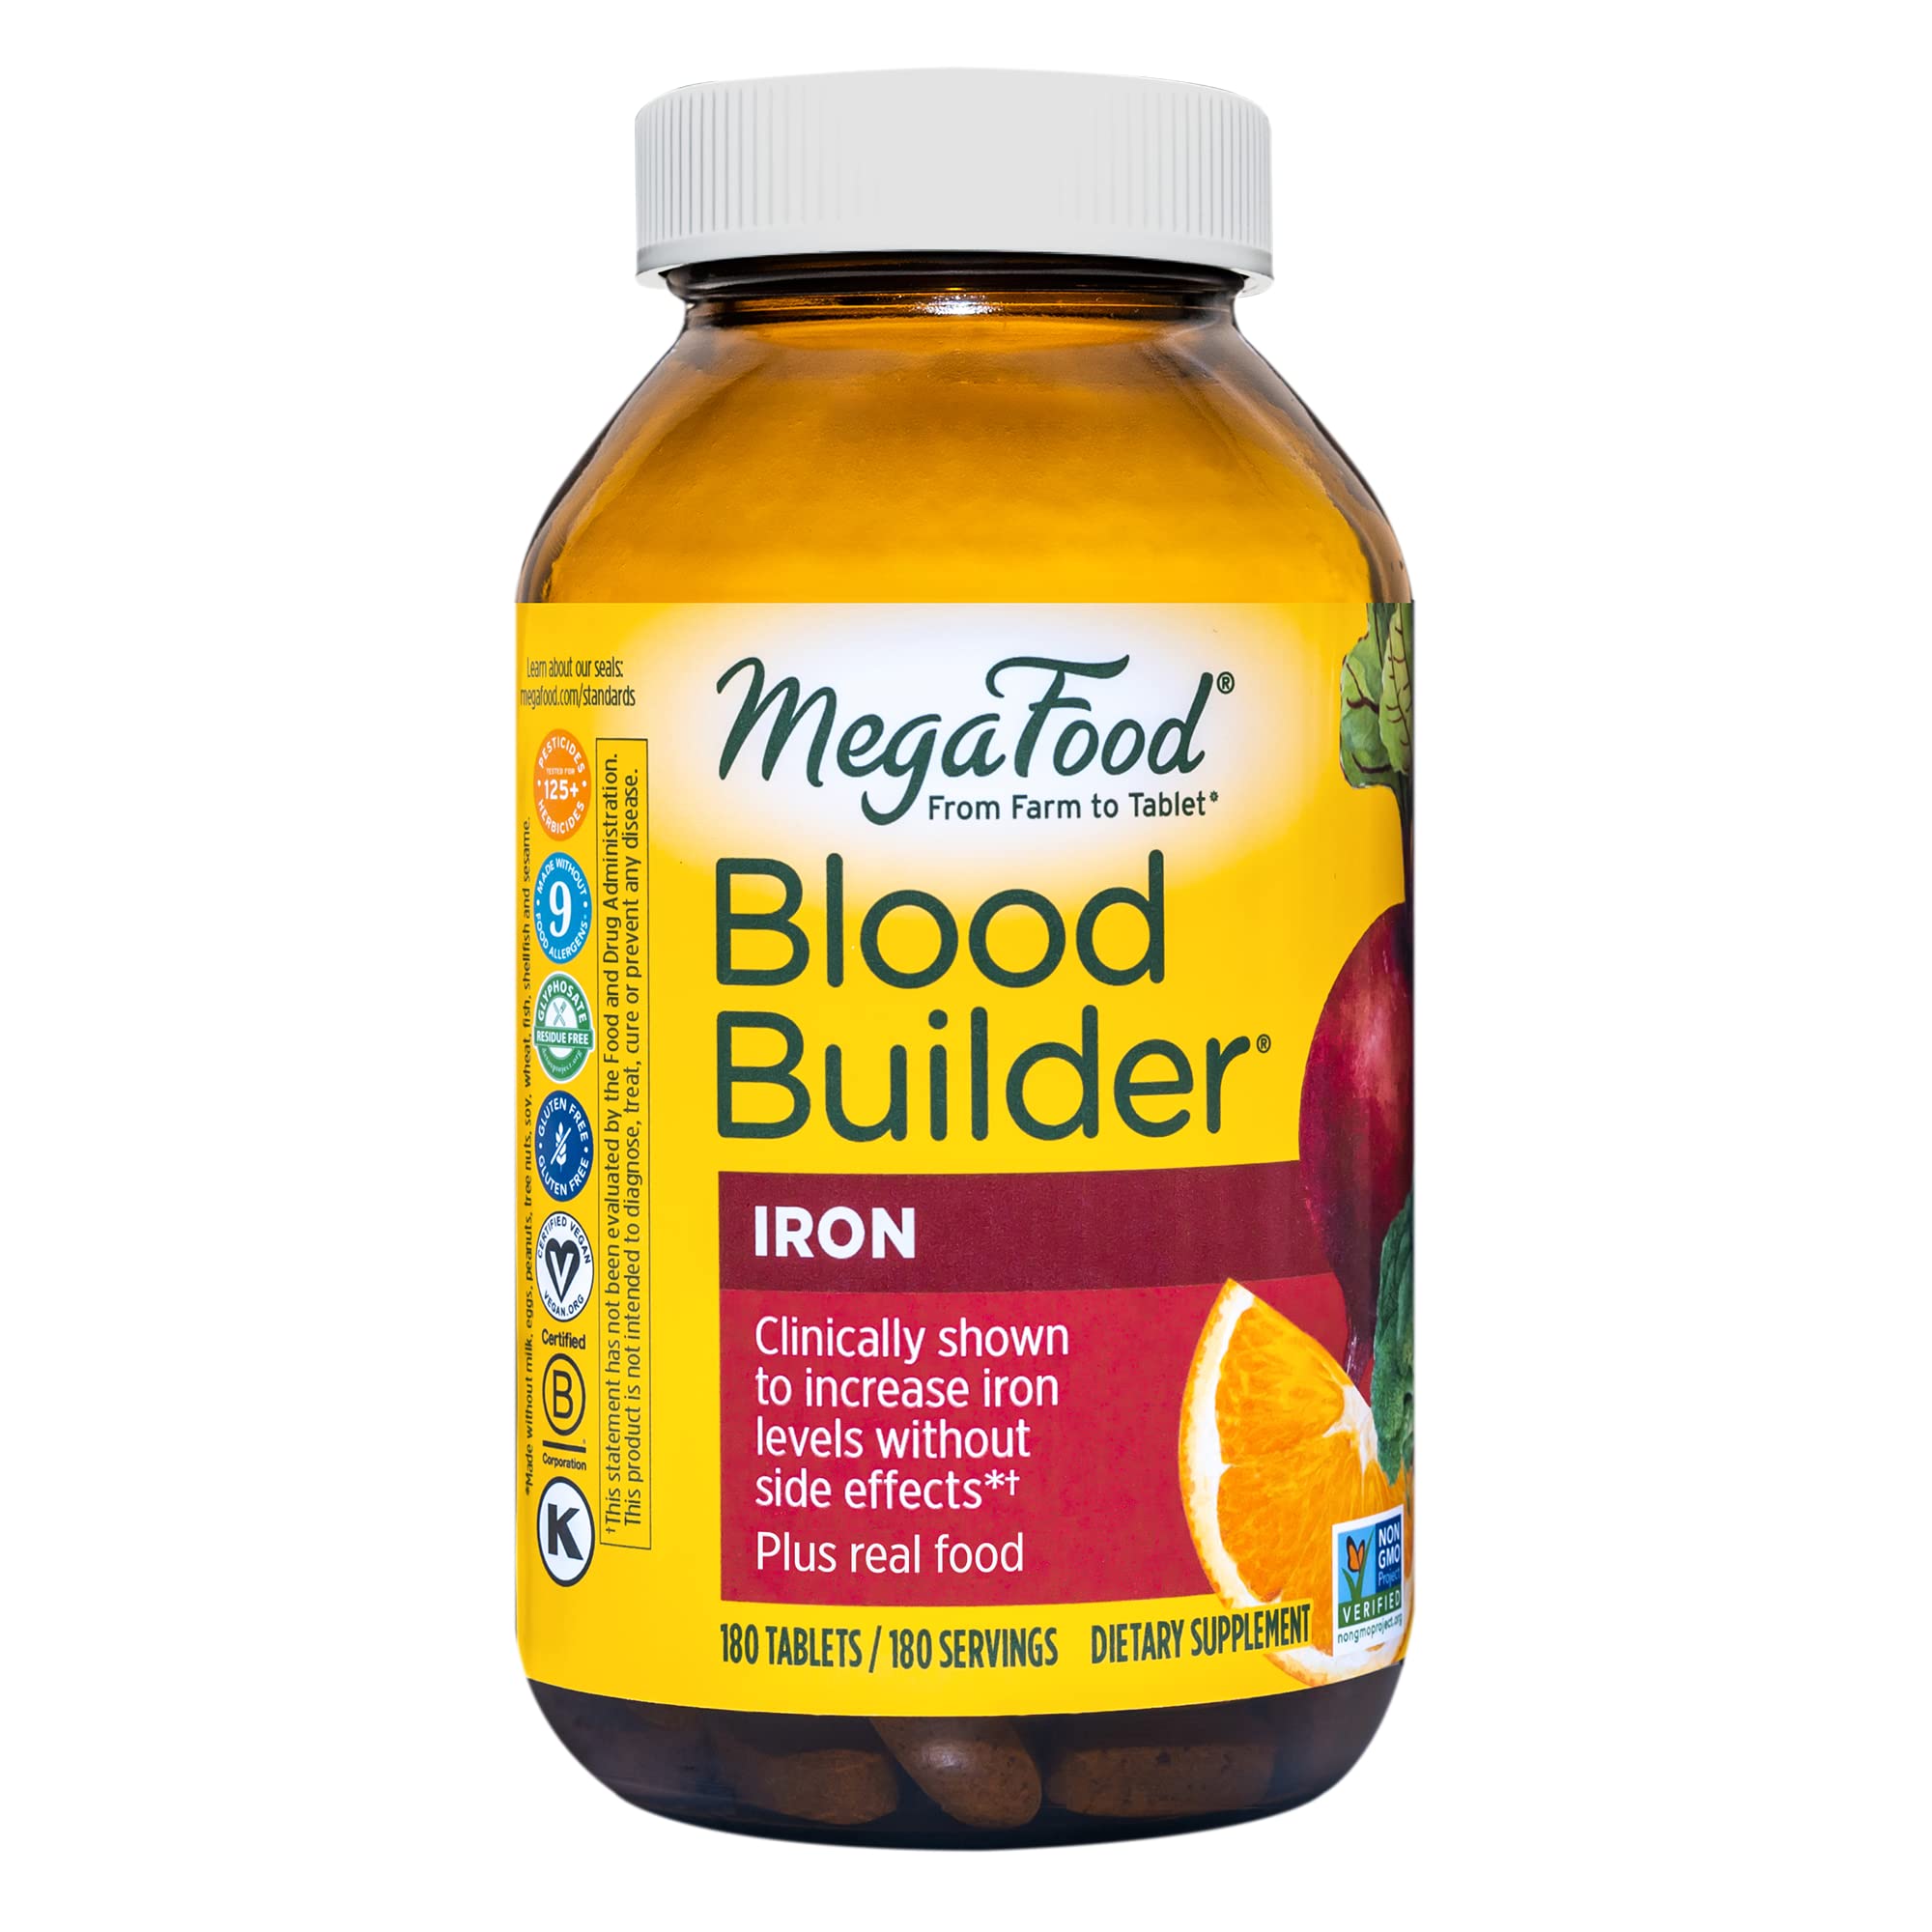 Mua MegaFood Blood Builder - Iron Supplement Shown to Increase Iron Levels  without Nausea or Constipation - Energy Support with Iron, Vitamin B12, and  Folic Acid - Vegan - 180 Tabs trên